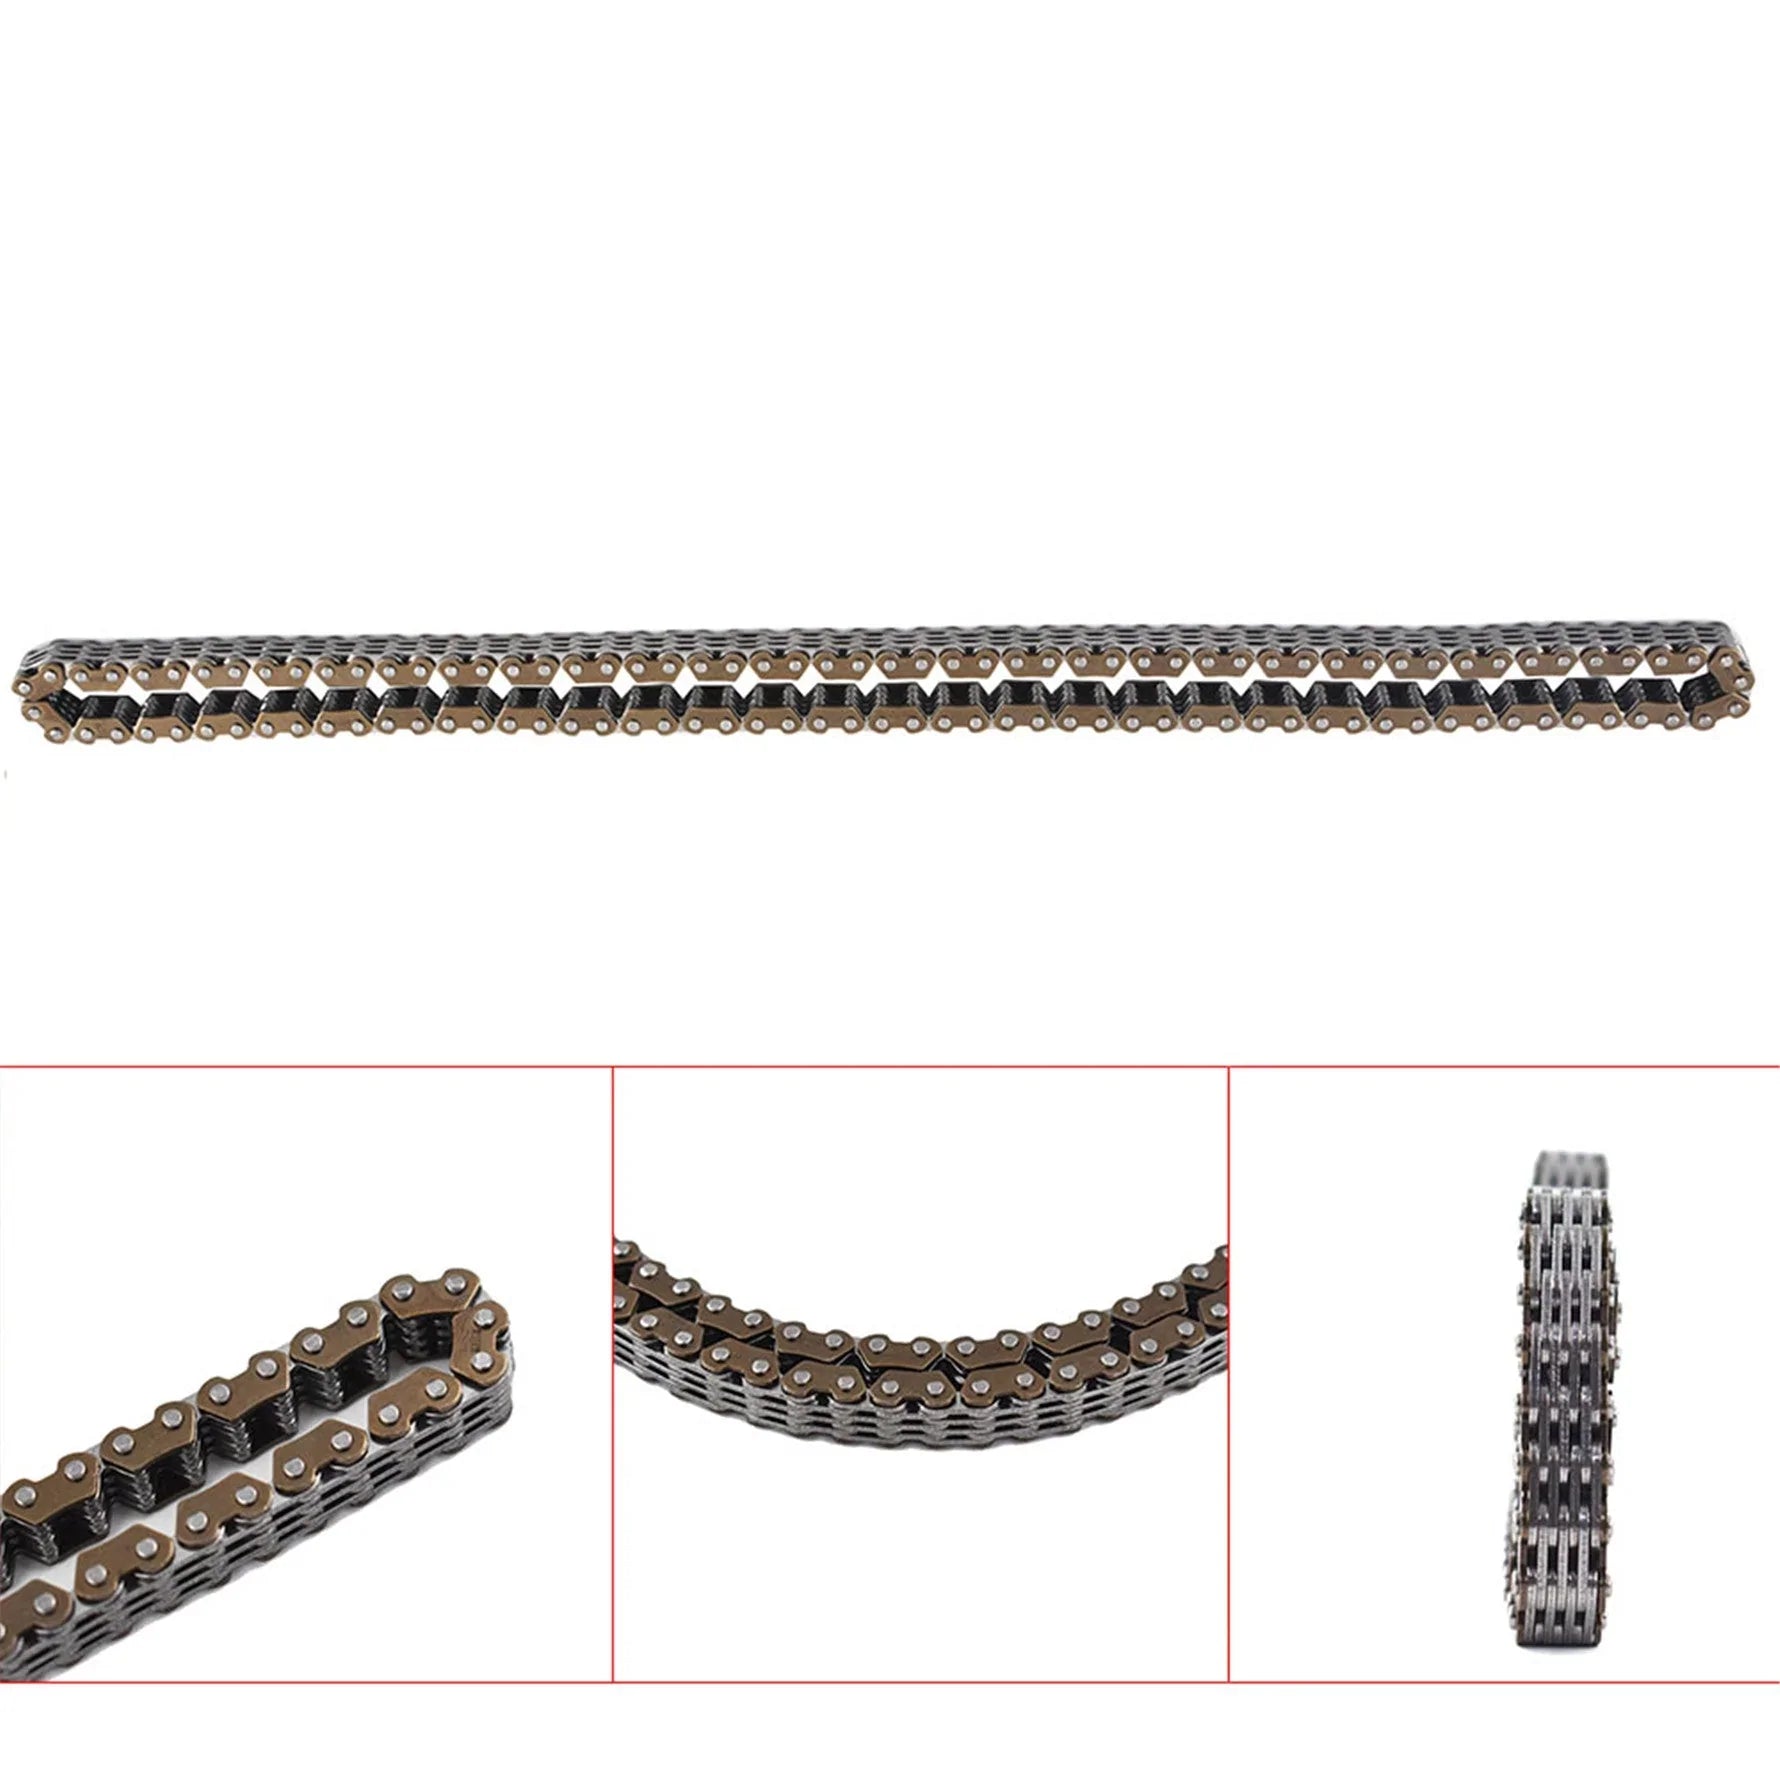 labwork Cam Chain Timing Chain fit for Honda 02-08 CRF450R & 2005-2009/2012-2015 CRF450X LAB WORK MOTO